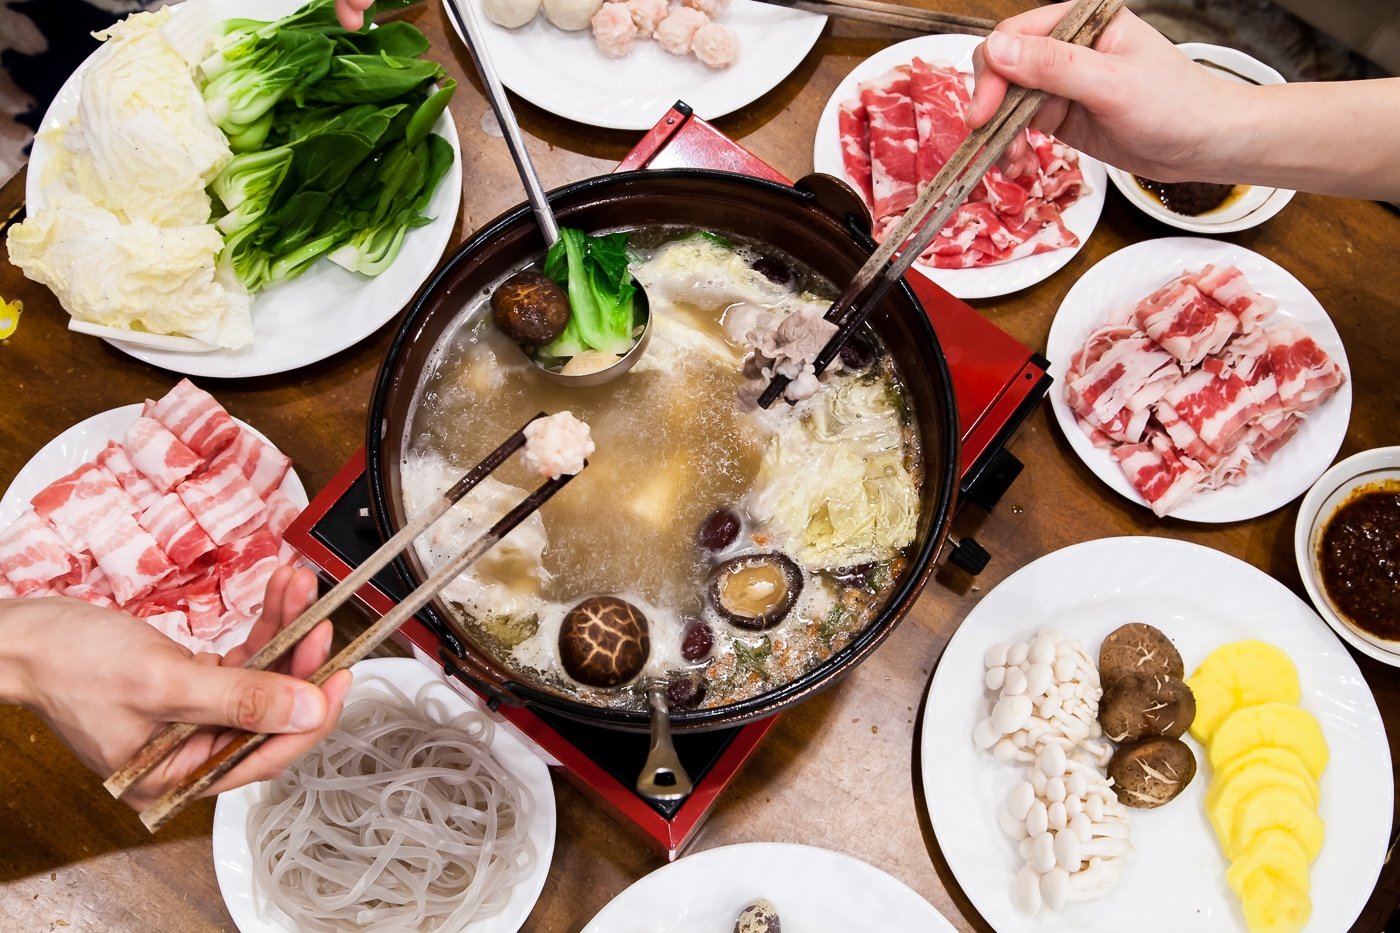 Chinese hot pot - How to make it at home (with spicy and herbal broth )